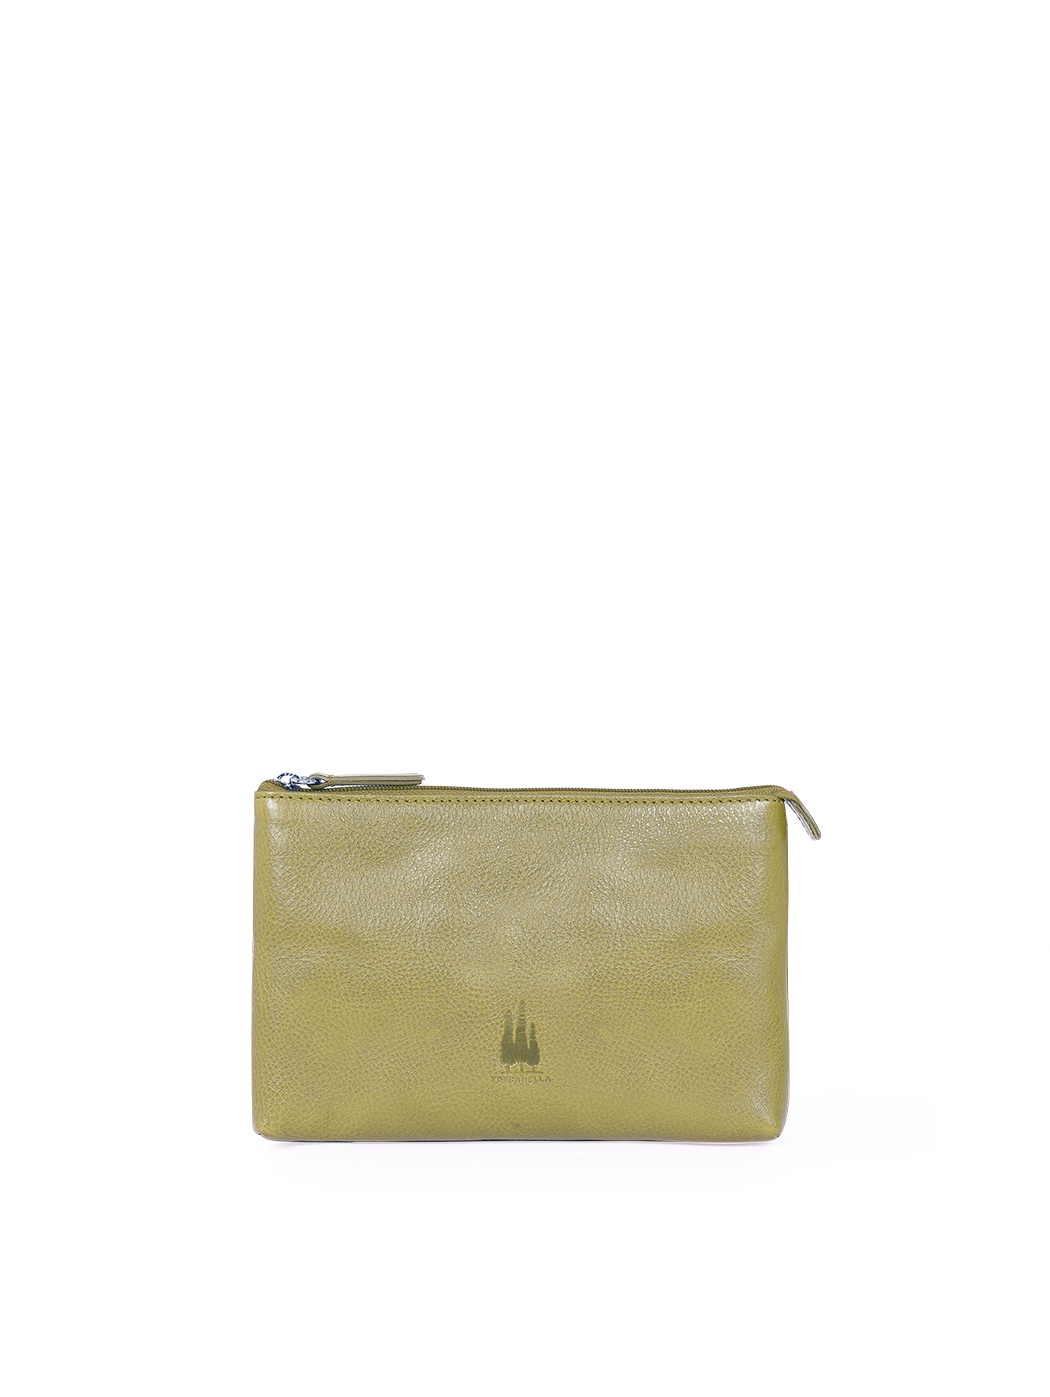 Small Travel Pouch in Leather Olive green